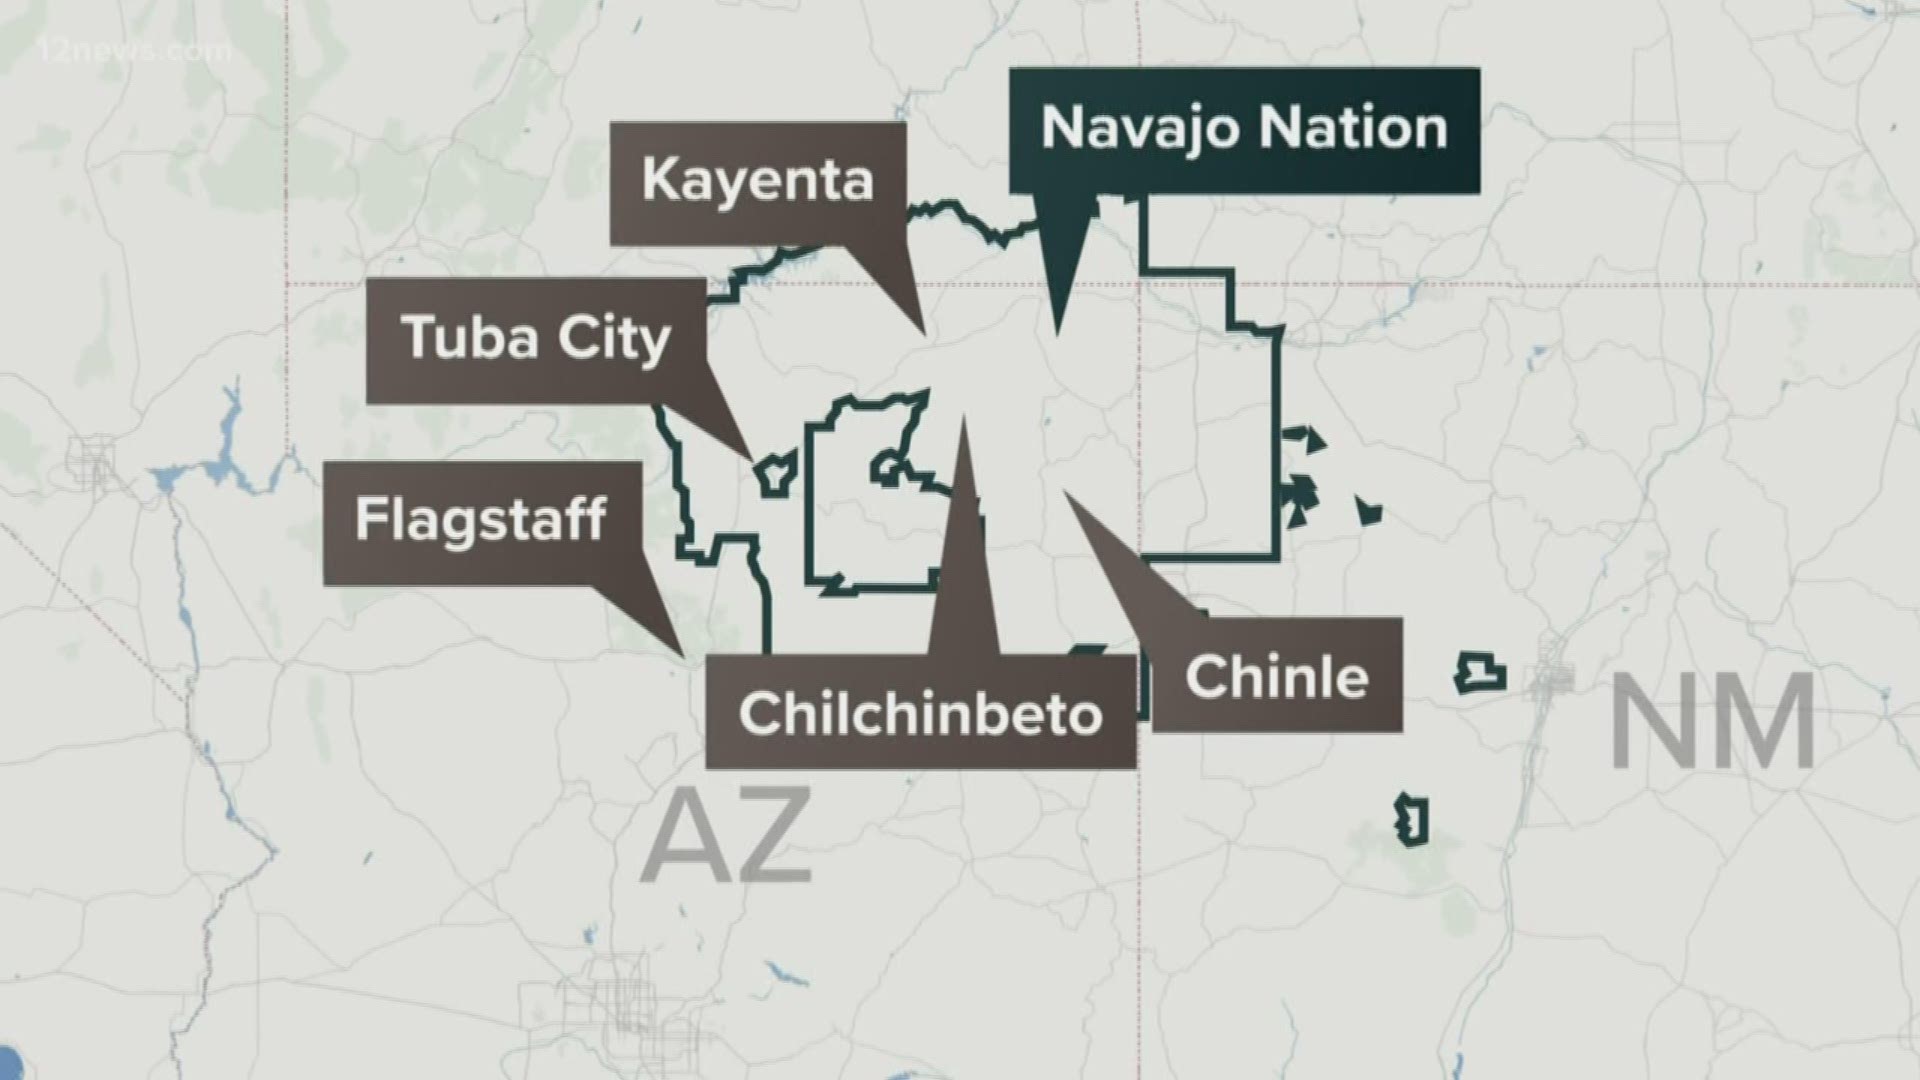 The Navajo Nations' president says they're being ignored by the feds but residents can't ignore the crisis. There are fears the tribe could be wiped out by the virus